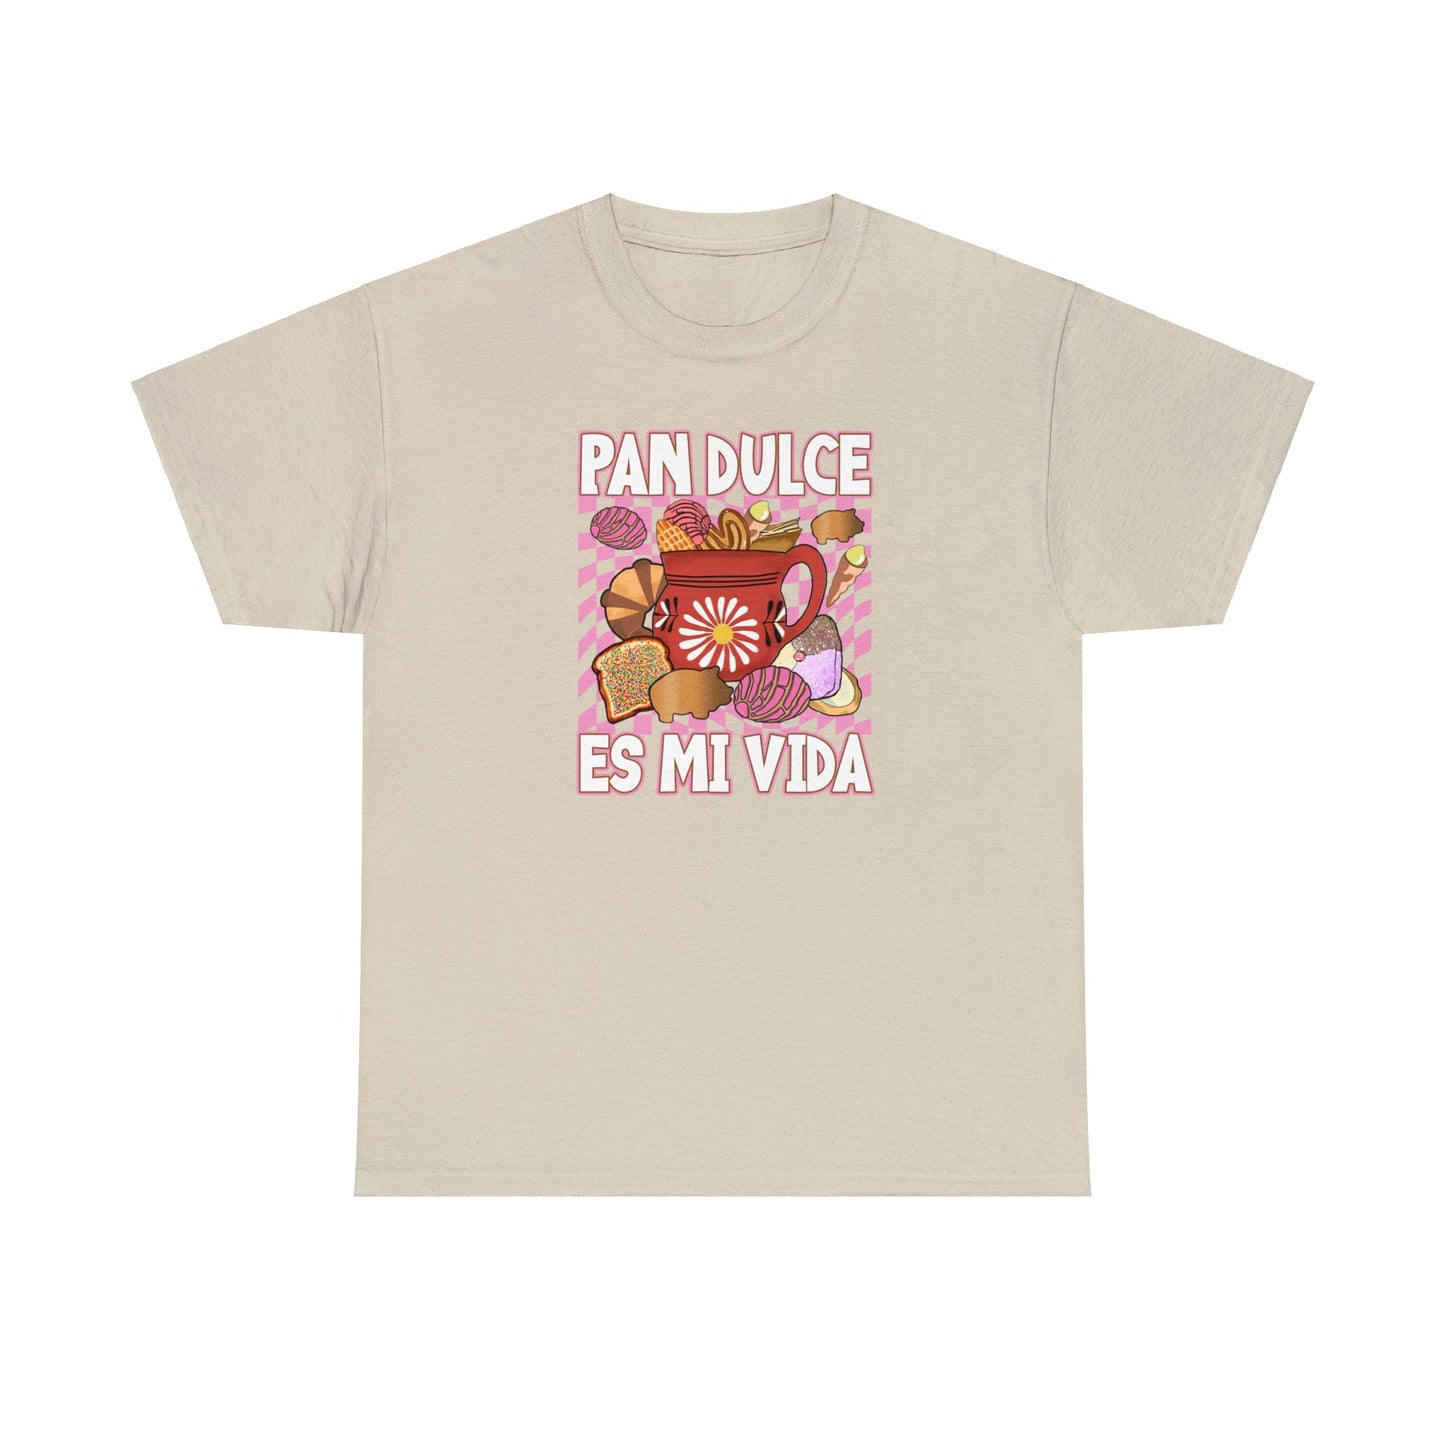 Pan dulce es mi vida tshirt. Mexican shirt for her or him. Unisex Heavy Cotton Tee with Mexican pastries. Cafecito, concha y chisme